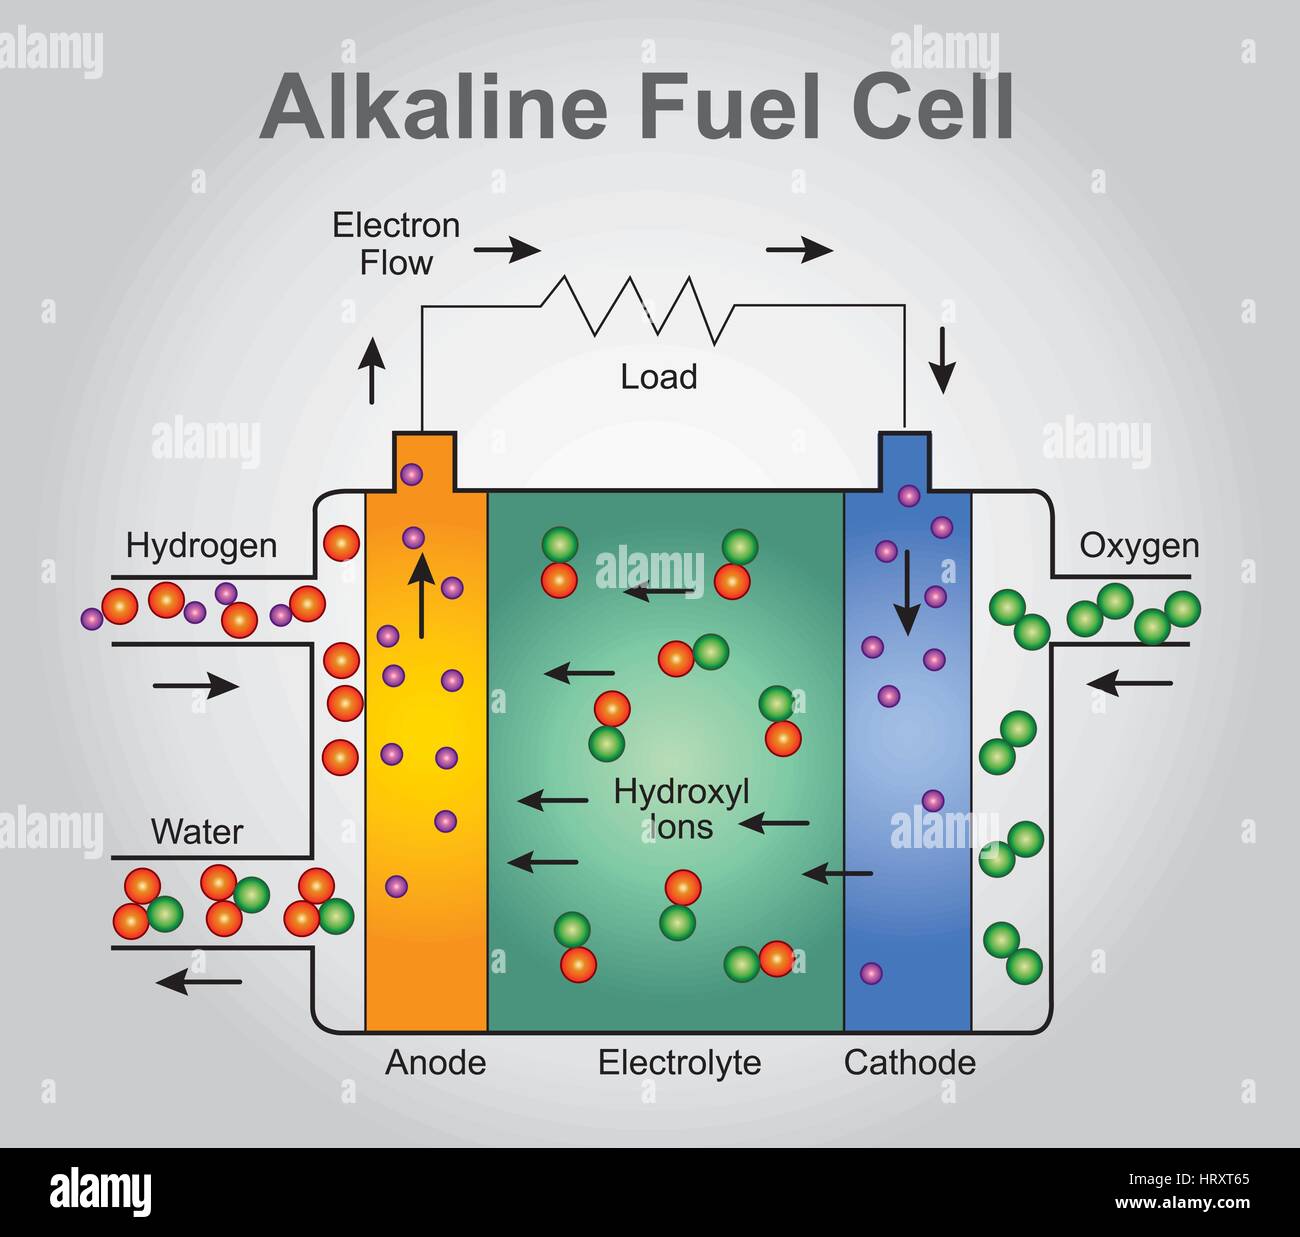 The alkaline fuel cell, also known as the Bacon fuel cell after its British inventor, Francis Thomas Bacon, is one of the most developed fuel cell tec Stock Vector